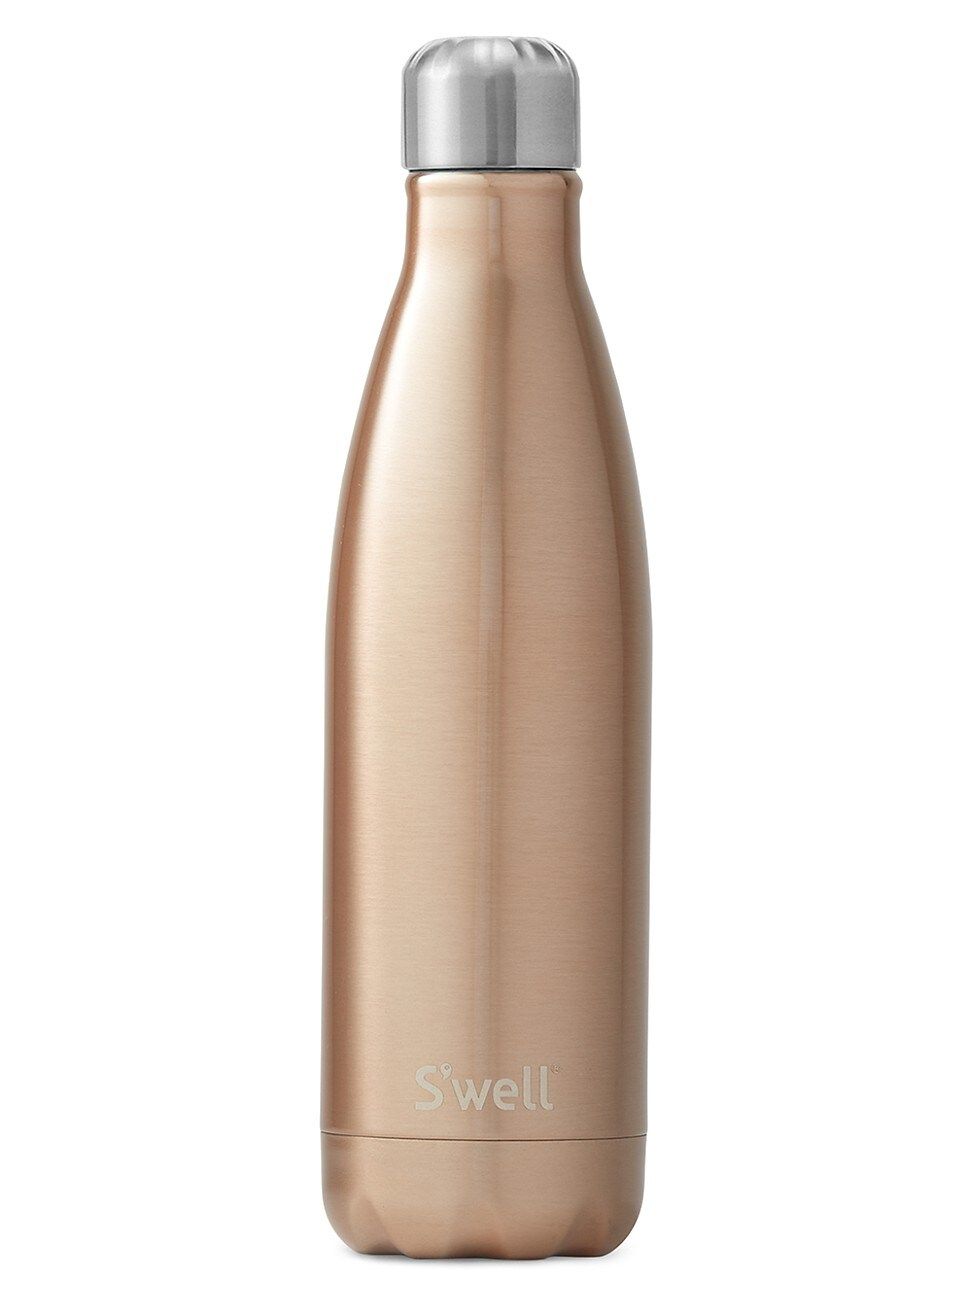 S'well Pyrite Stainless Steel Reusable Bottle/17 oz. - Pyrite Gold Lining | Saks Fifth Avenue